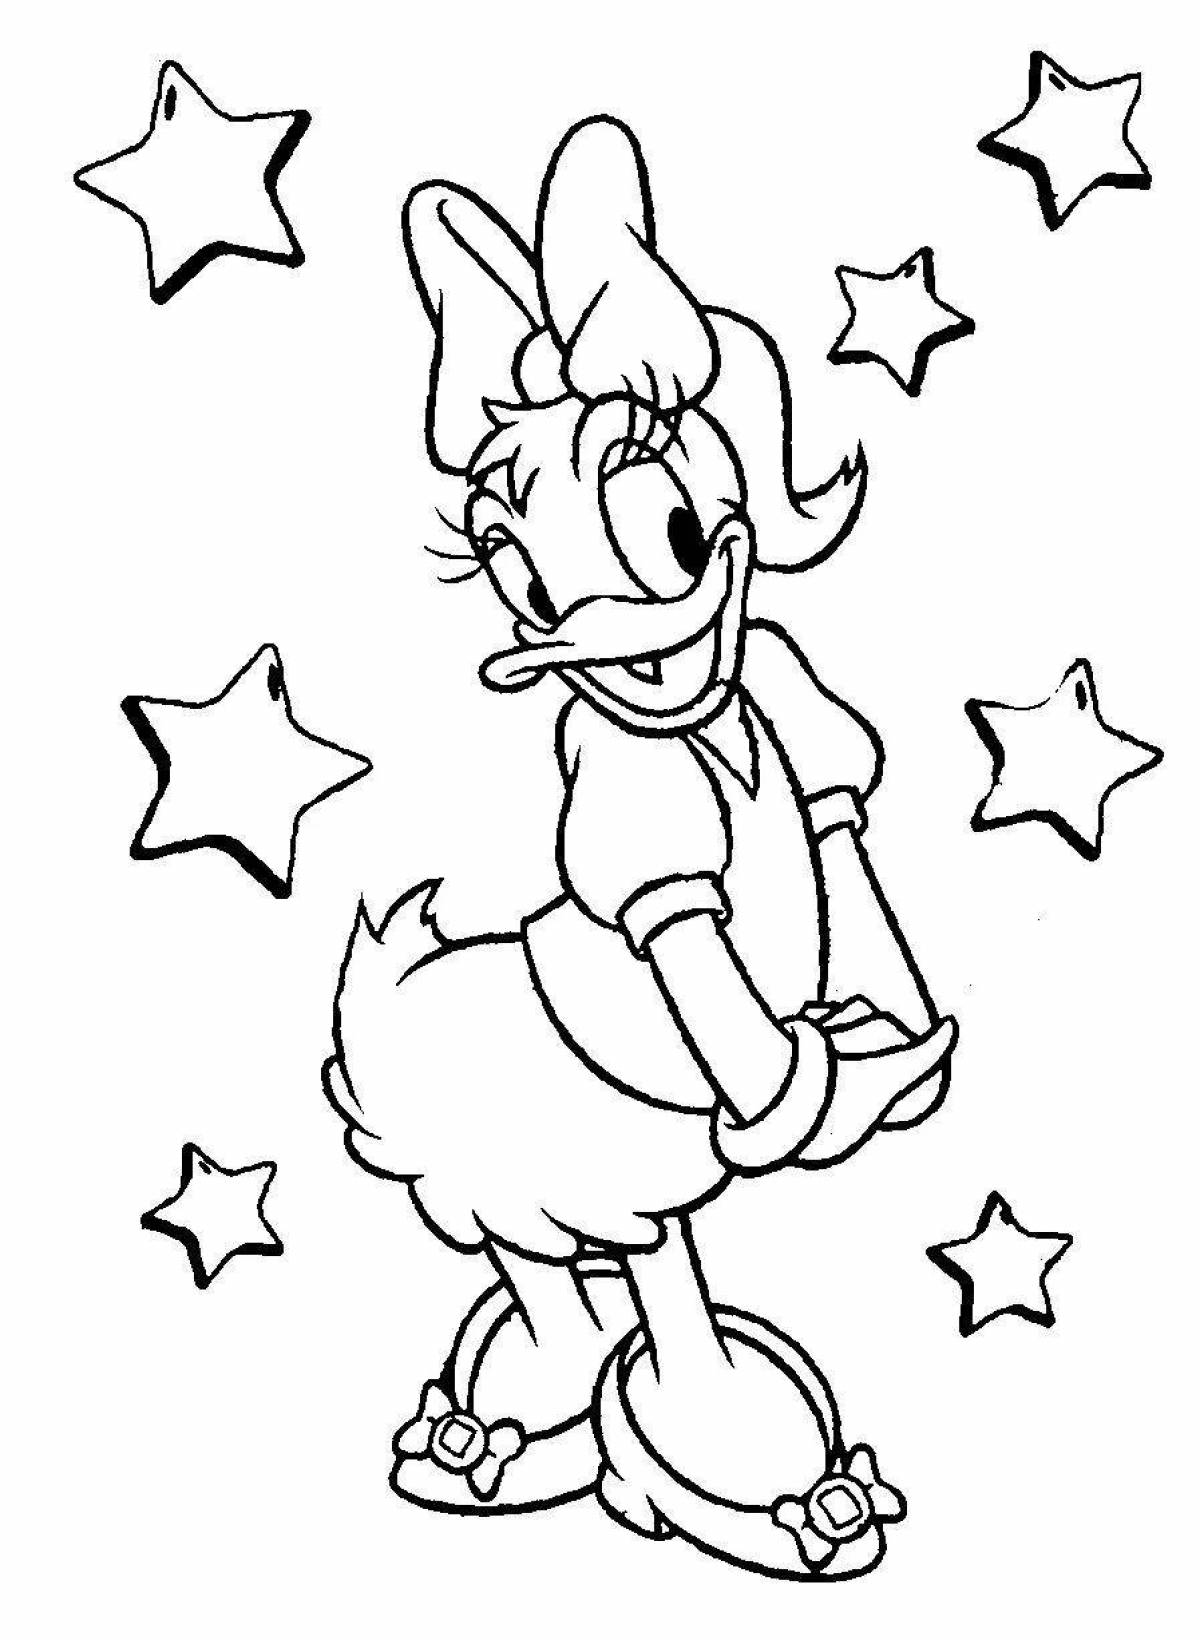 Color explosion cartoon character coloring page